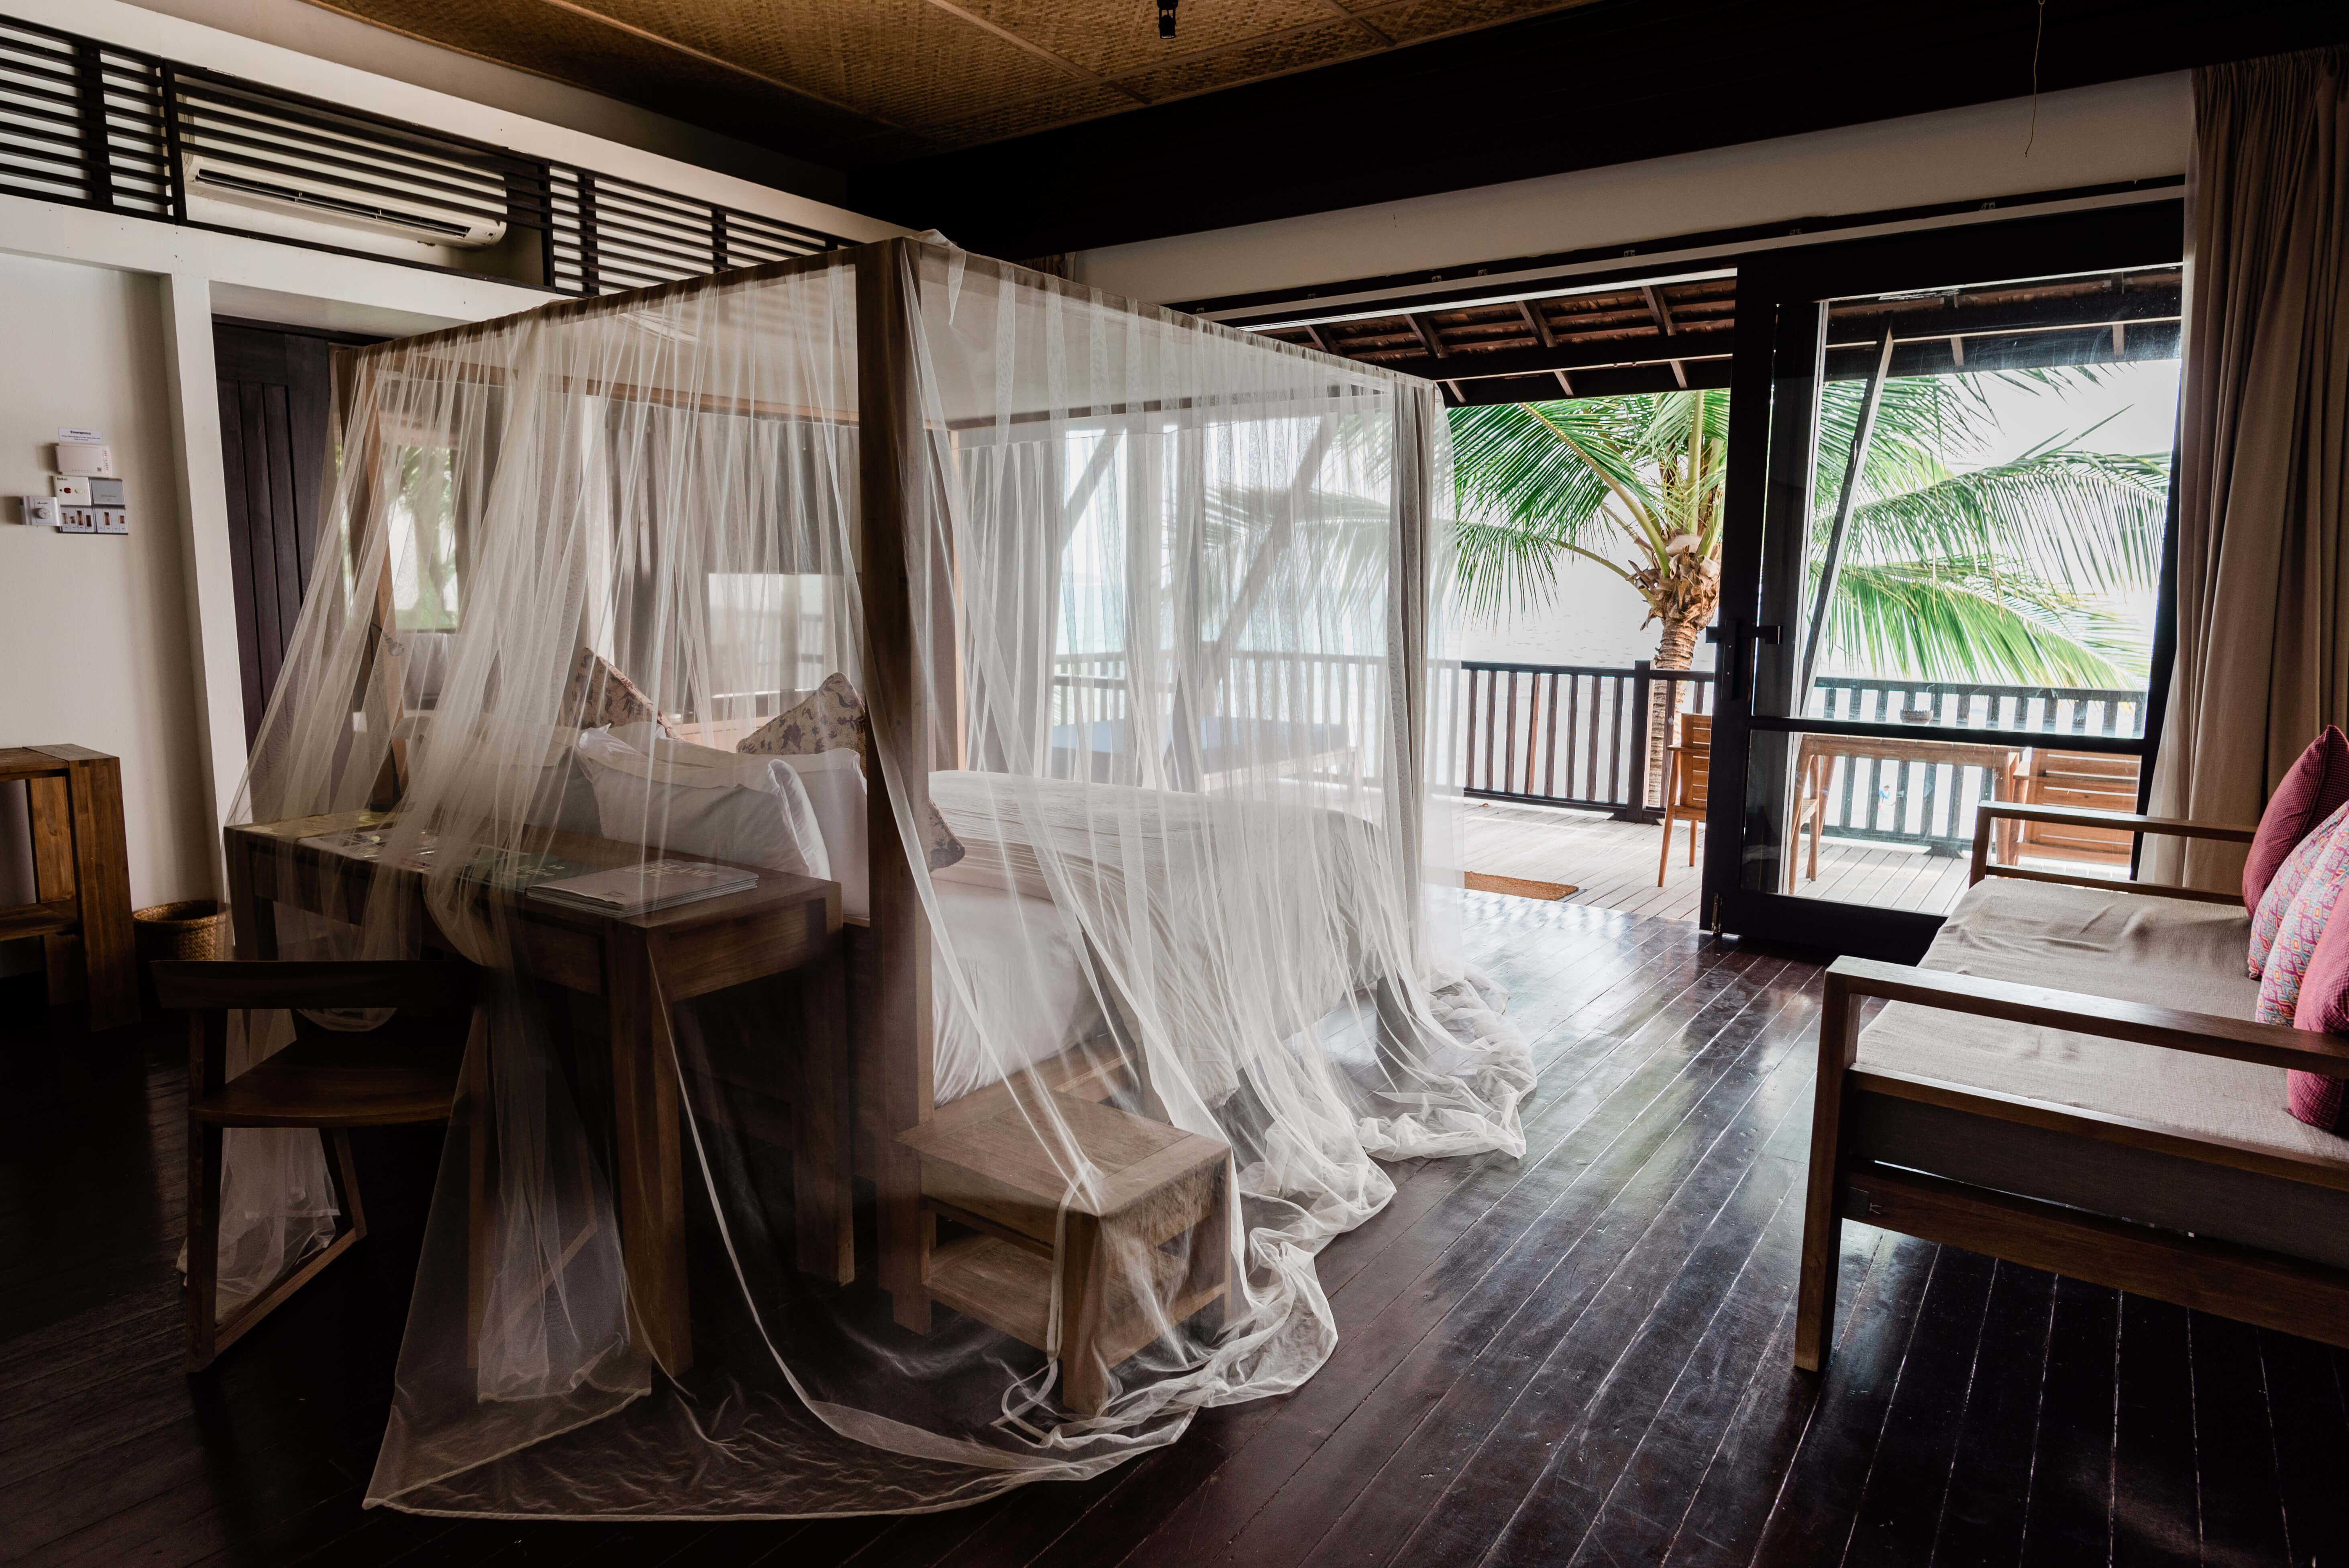 Its eco-friendly practices may challenge guests’ expectations of a high-priced resort. Villas are simply furnished and few disposable amenities, although Malin and Goetz toiletries are provided in large, refillable bottles. Photo by Kenny Ng 